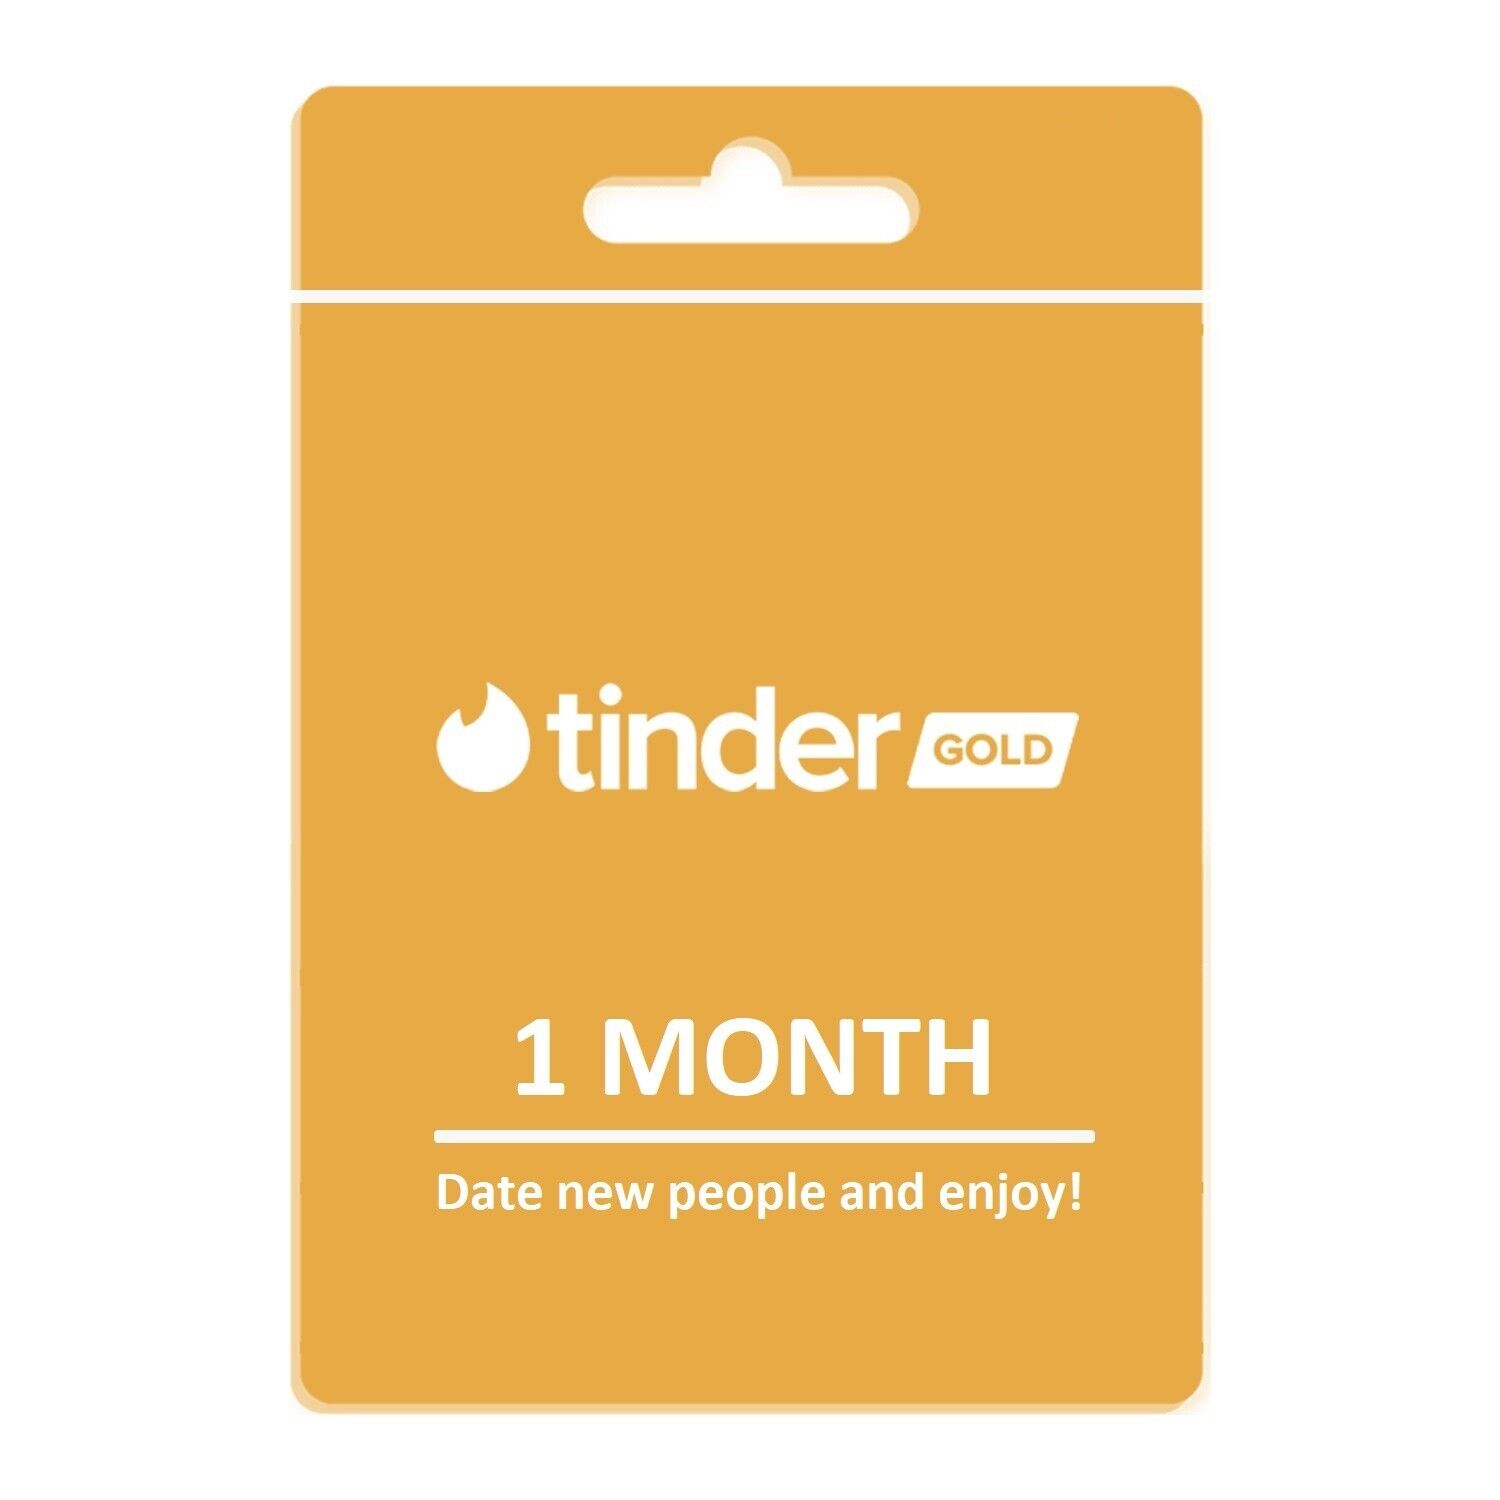 Tinder Promo Code 2022 Tinder Gold 1 Month Access Code - Instant Delivery - Tinder Gold Codes -  Discounted Price - Collect instantly via Autokey